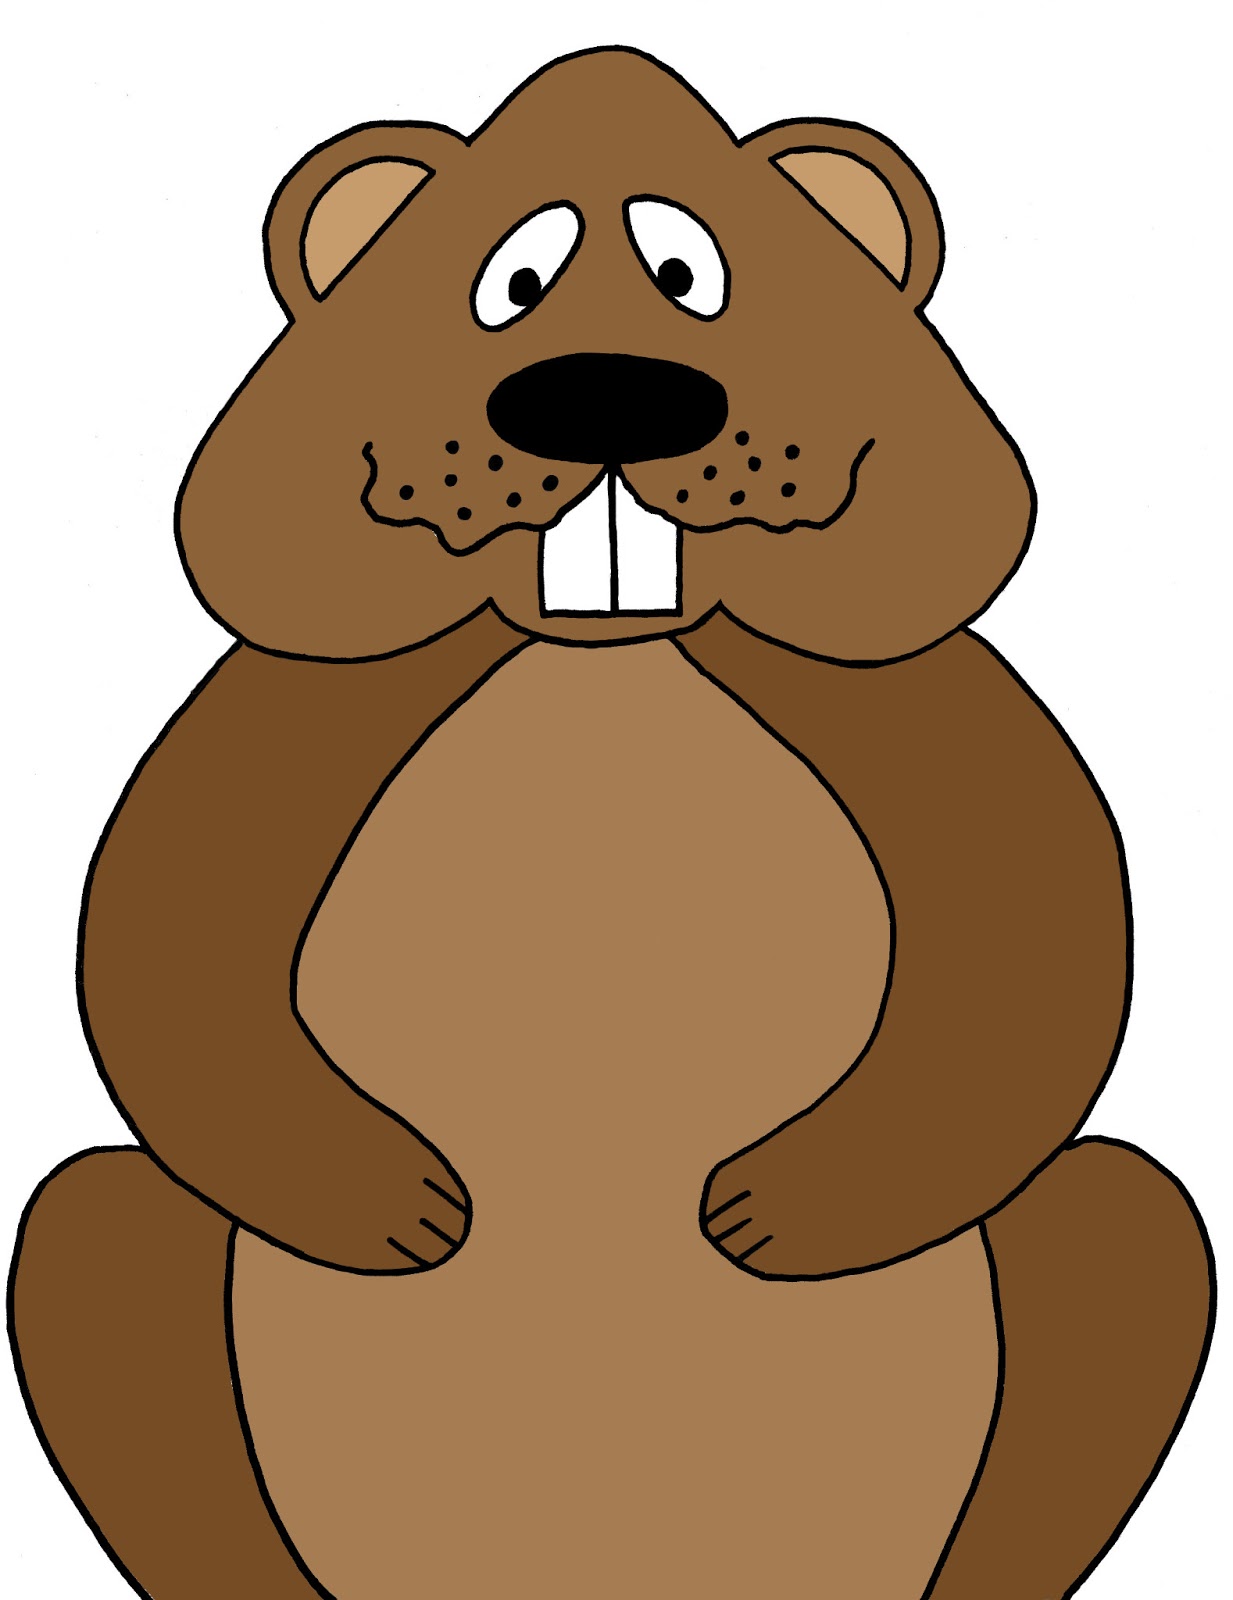 Groundhog Day Clipart at GetDrawings Free download